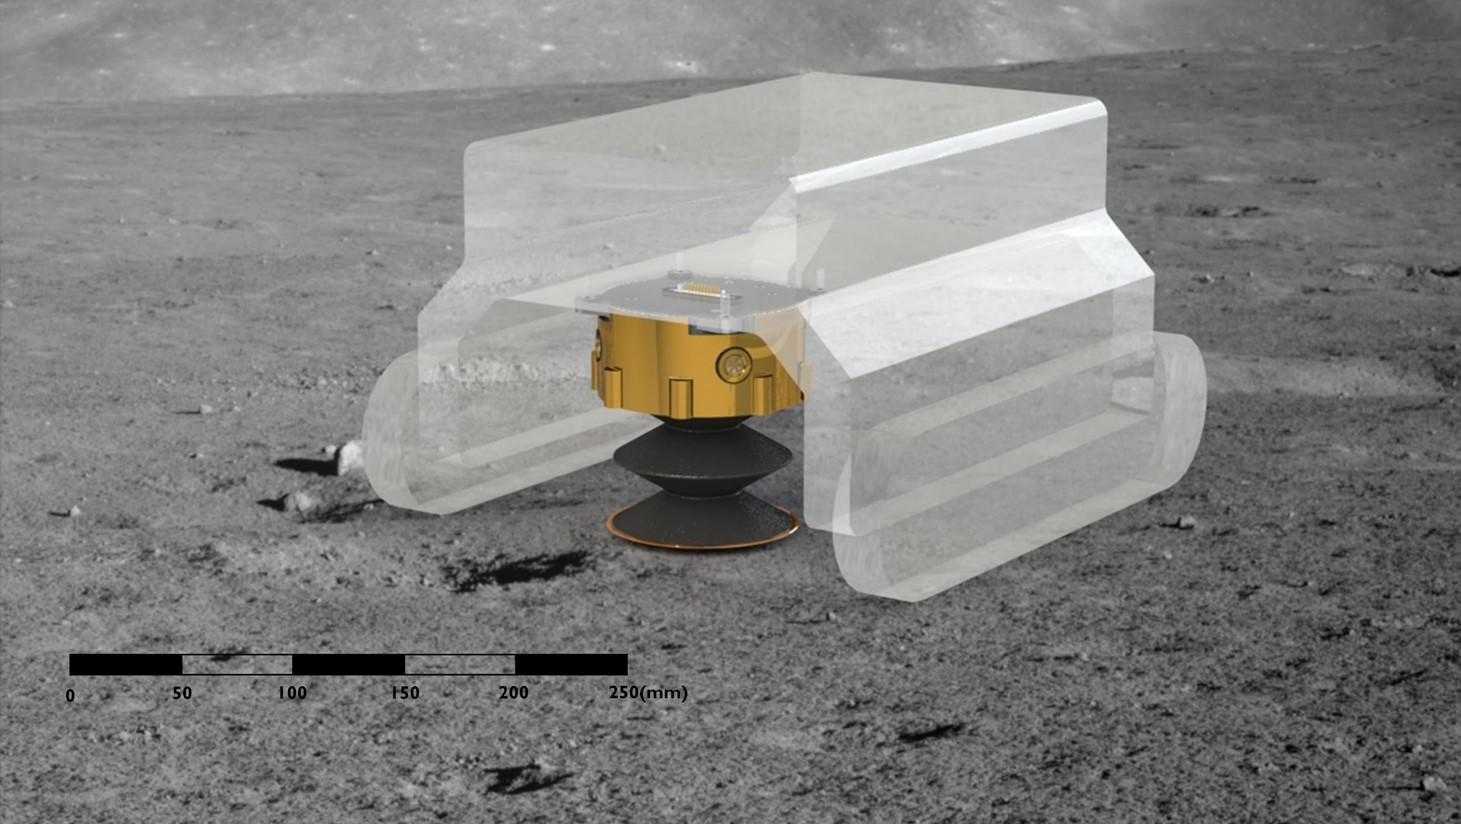 Micro payload for lunar rover NASA JPL “Honey, I shrunk the payload”challenge. CAD by Benjamin Jessett (Team Lead) and Siena Zubcic (Dep. Team Lead)